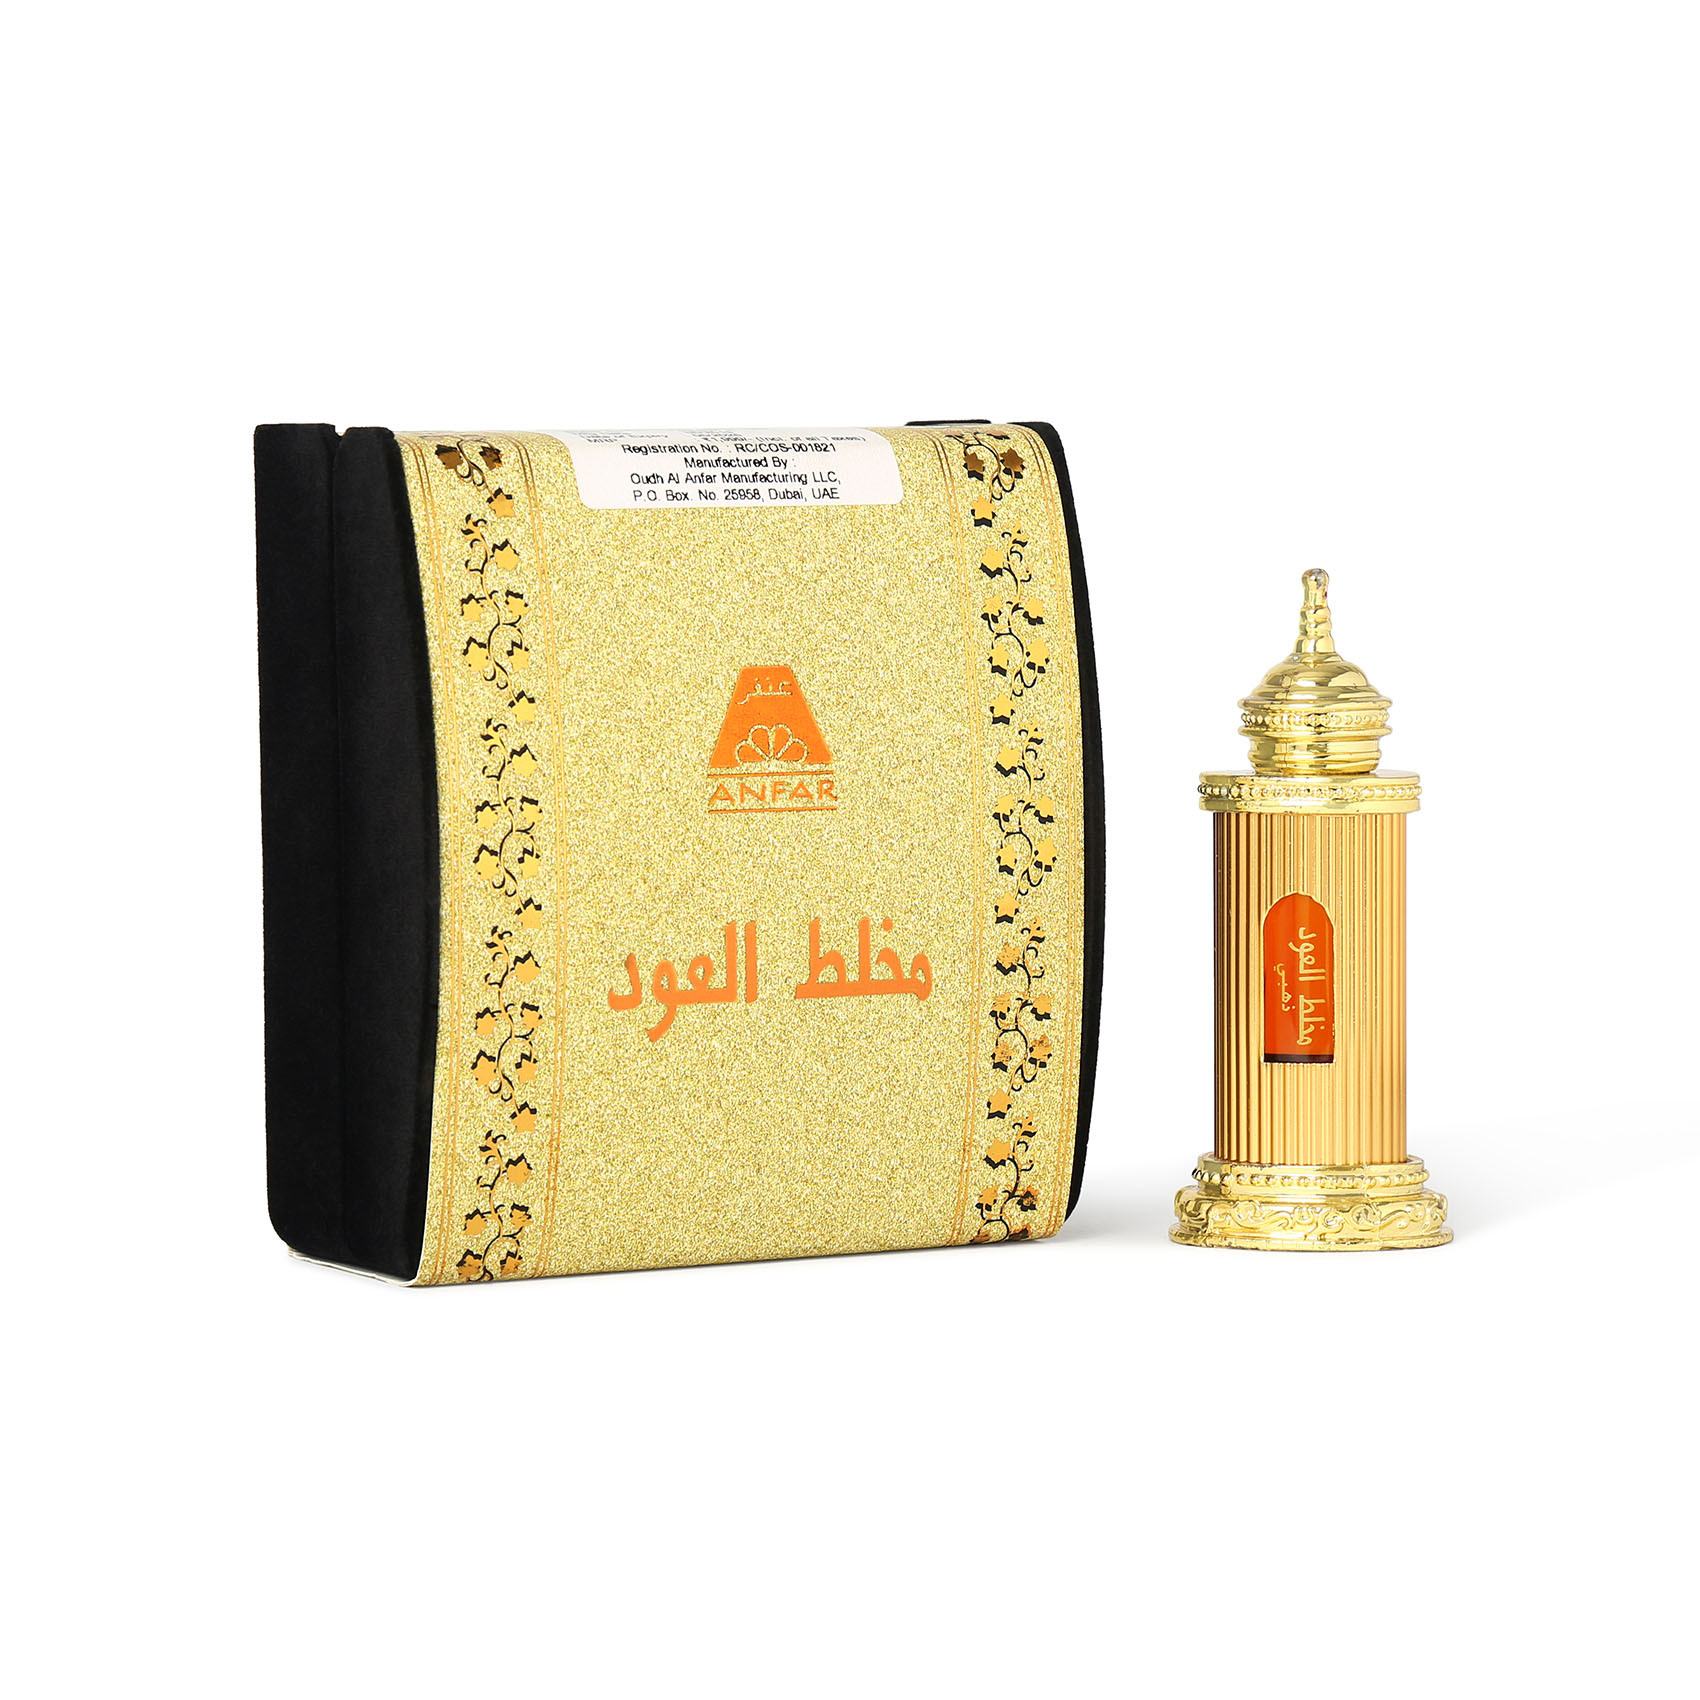 Mukhallat Al Oud Zahabi Concentrated Perfume Free From Alcohol 12ml For Men & Women  By Anfar- Made In Dubai